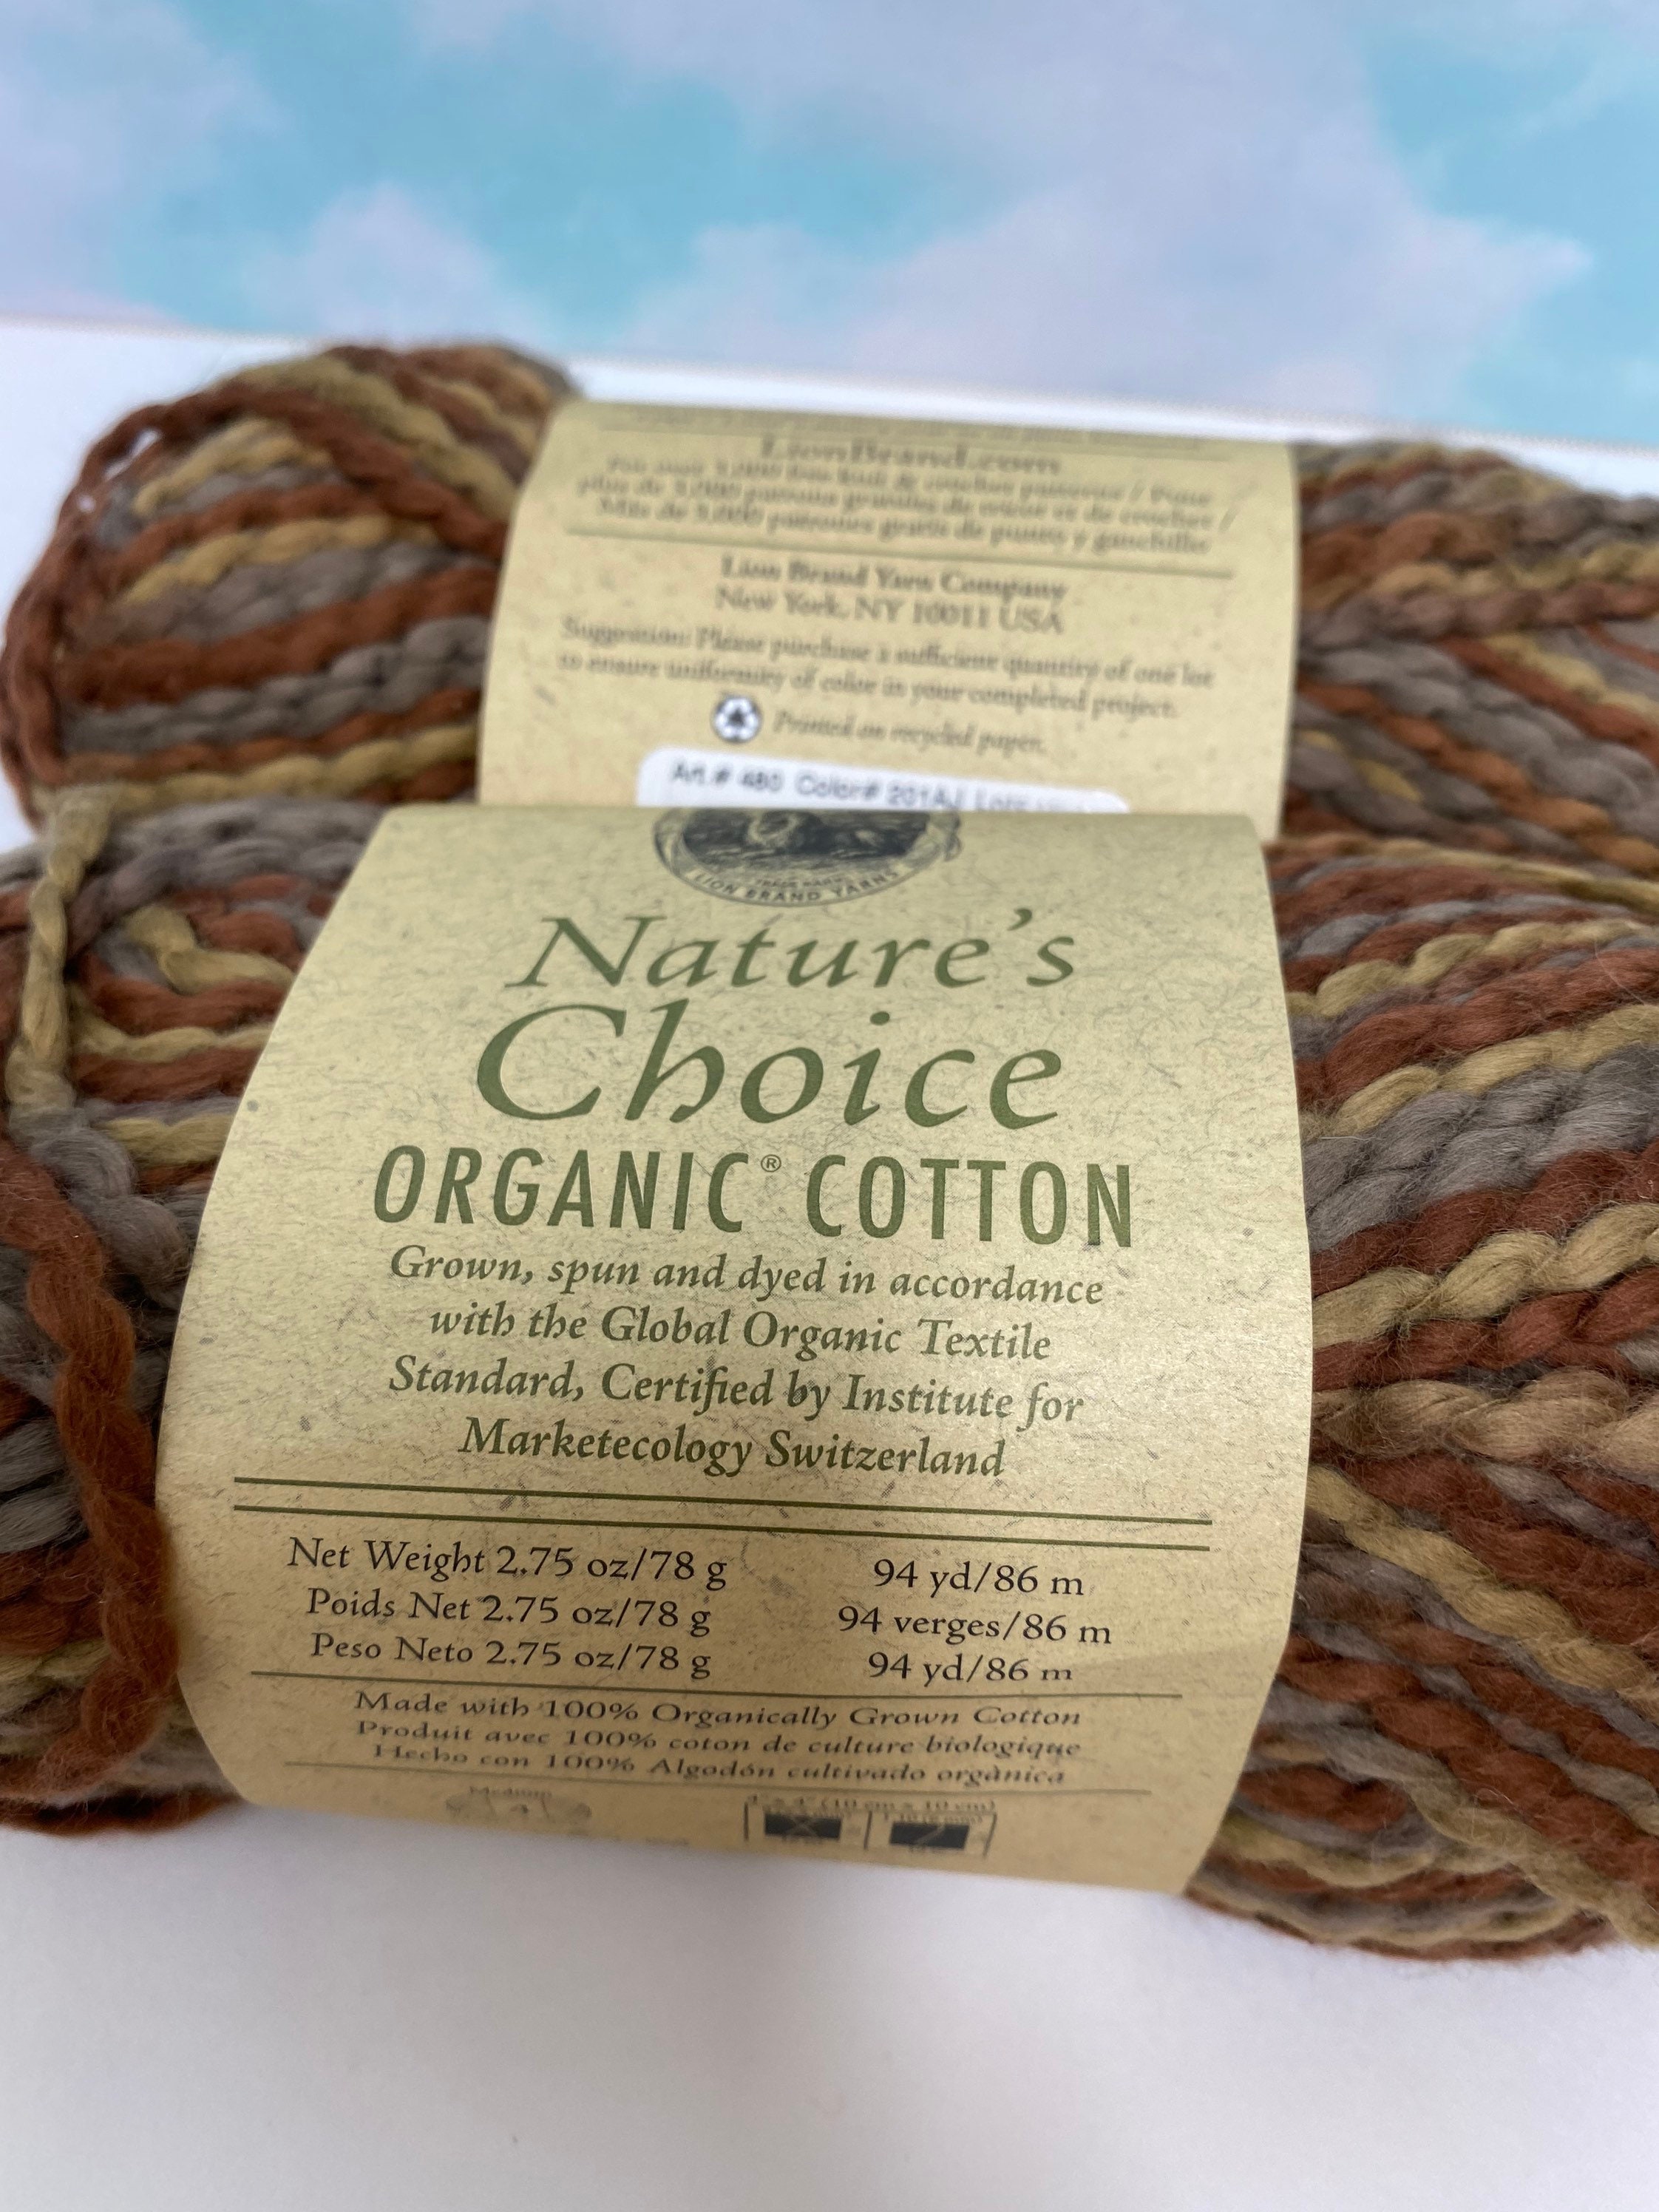 Lion Brand Yarn Organic Cotton, Soft and Bulky Yarn for Knitting,  Crocheting, and Crafting, 